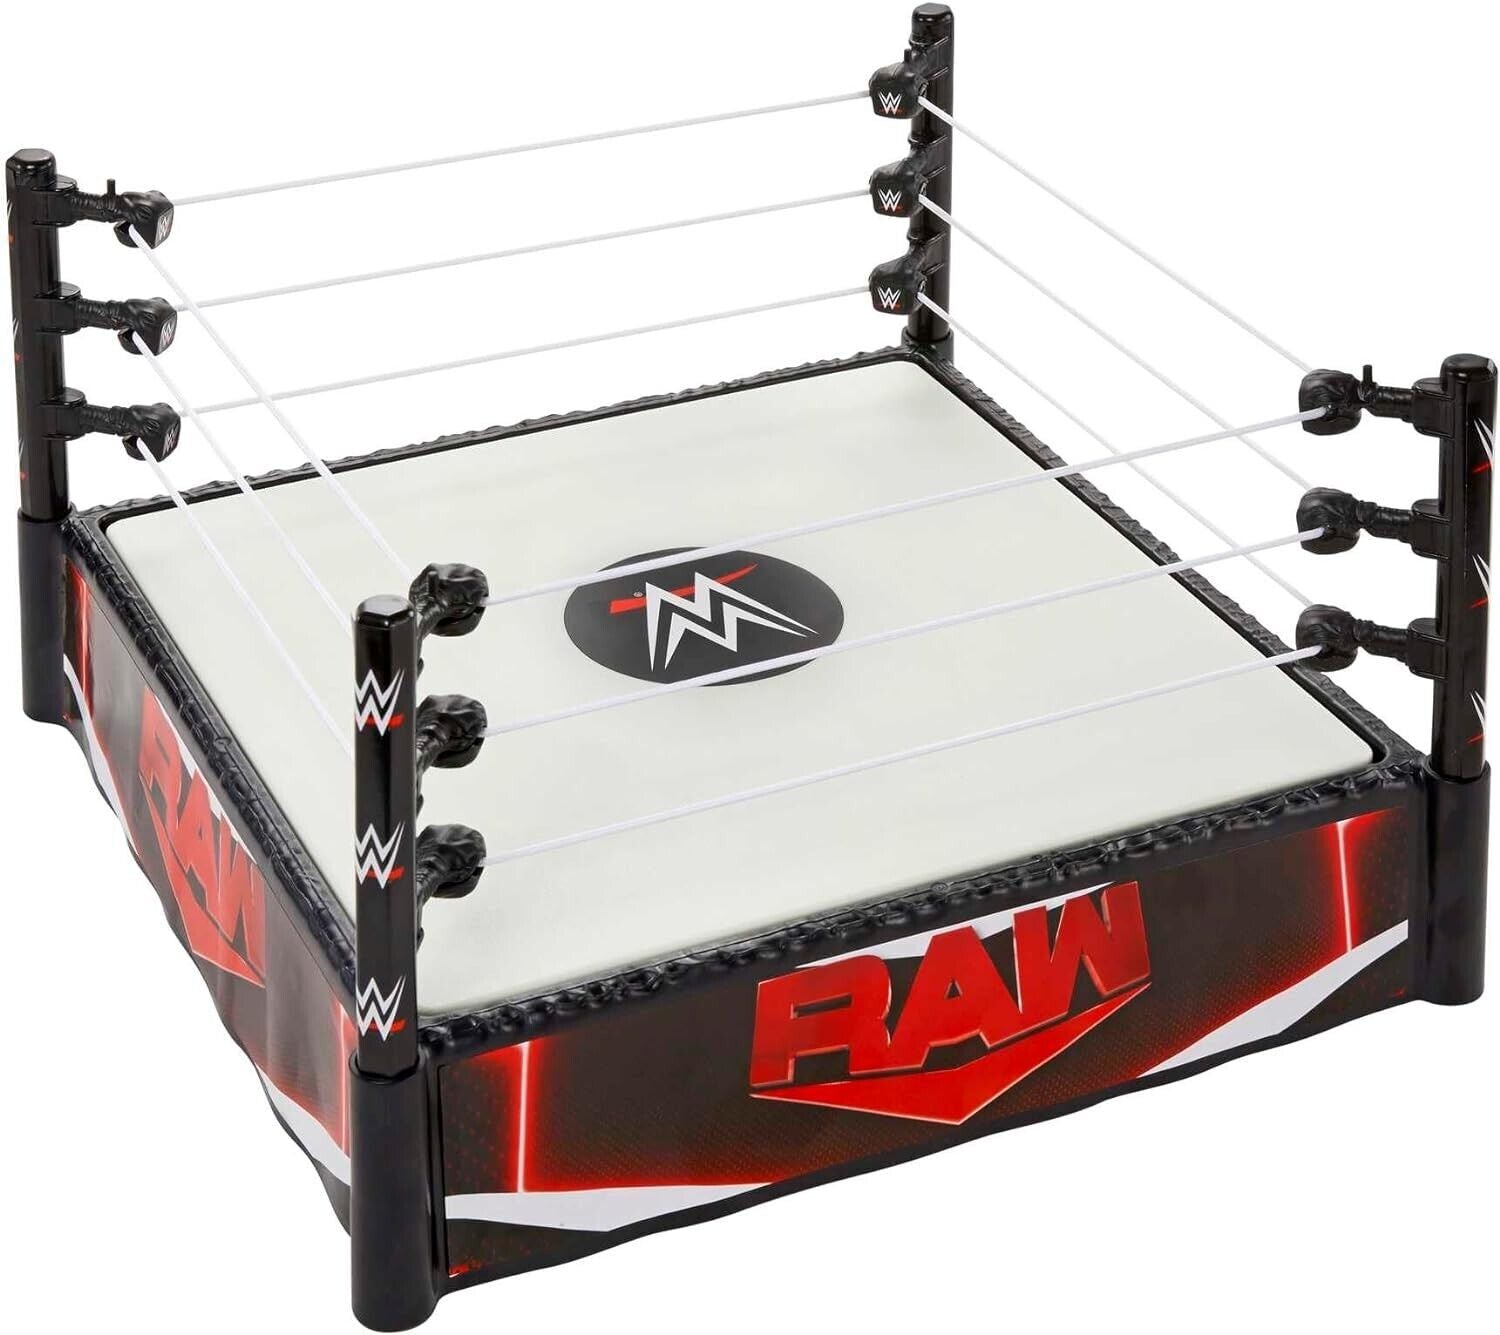 WWE Superstar Ring, 14 inches with Spring-Loaded Mat, 4 Event Apron Stickers & P